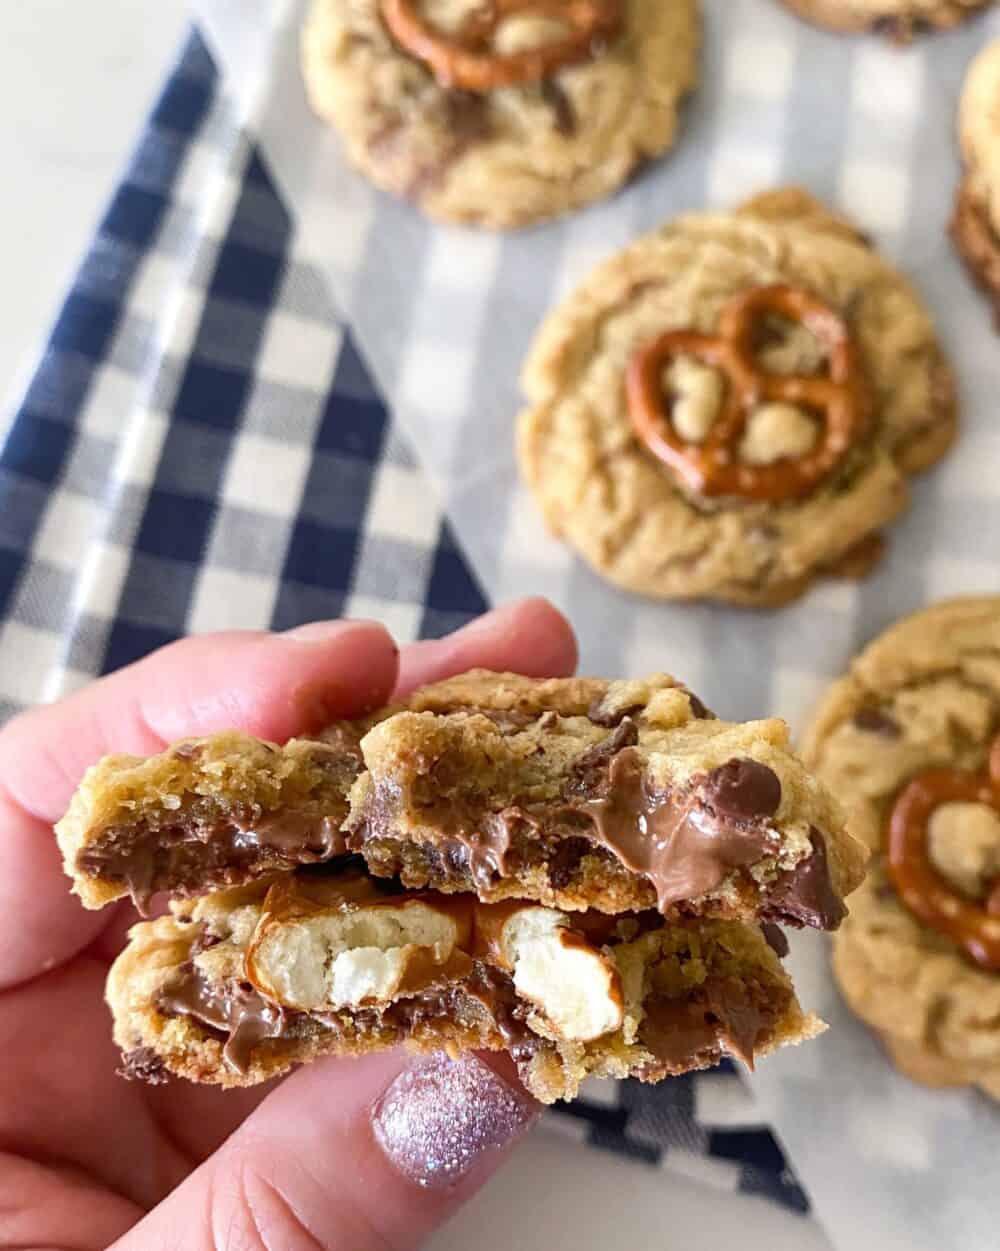 peanut butter cup cookies cut in half to show inside